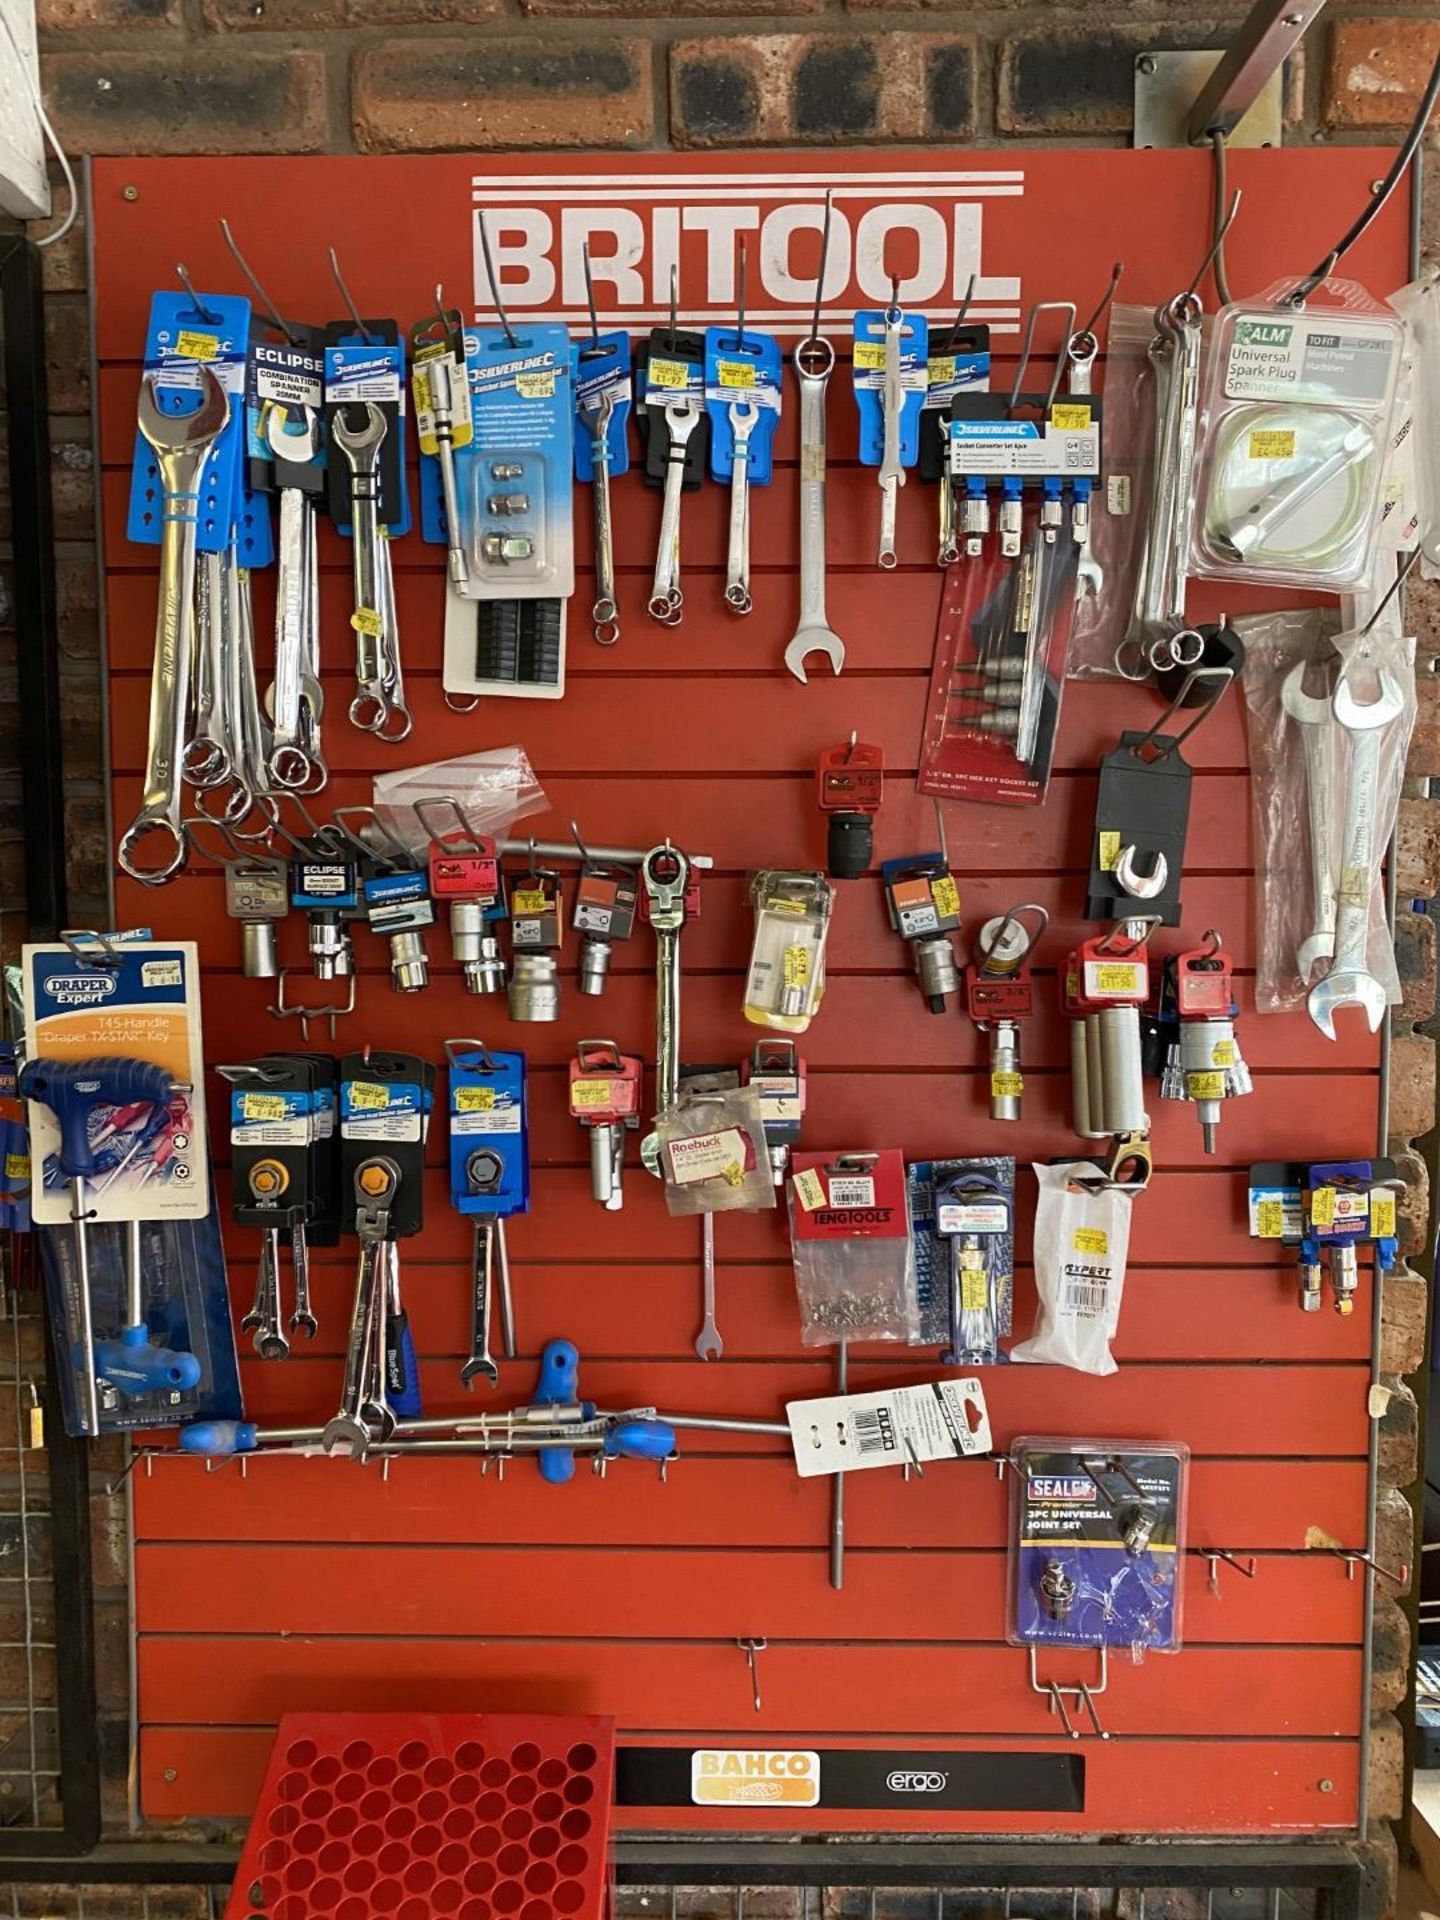 Britool wall display and contents including spanners etc.